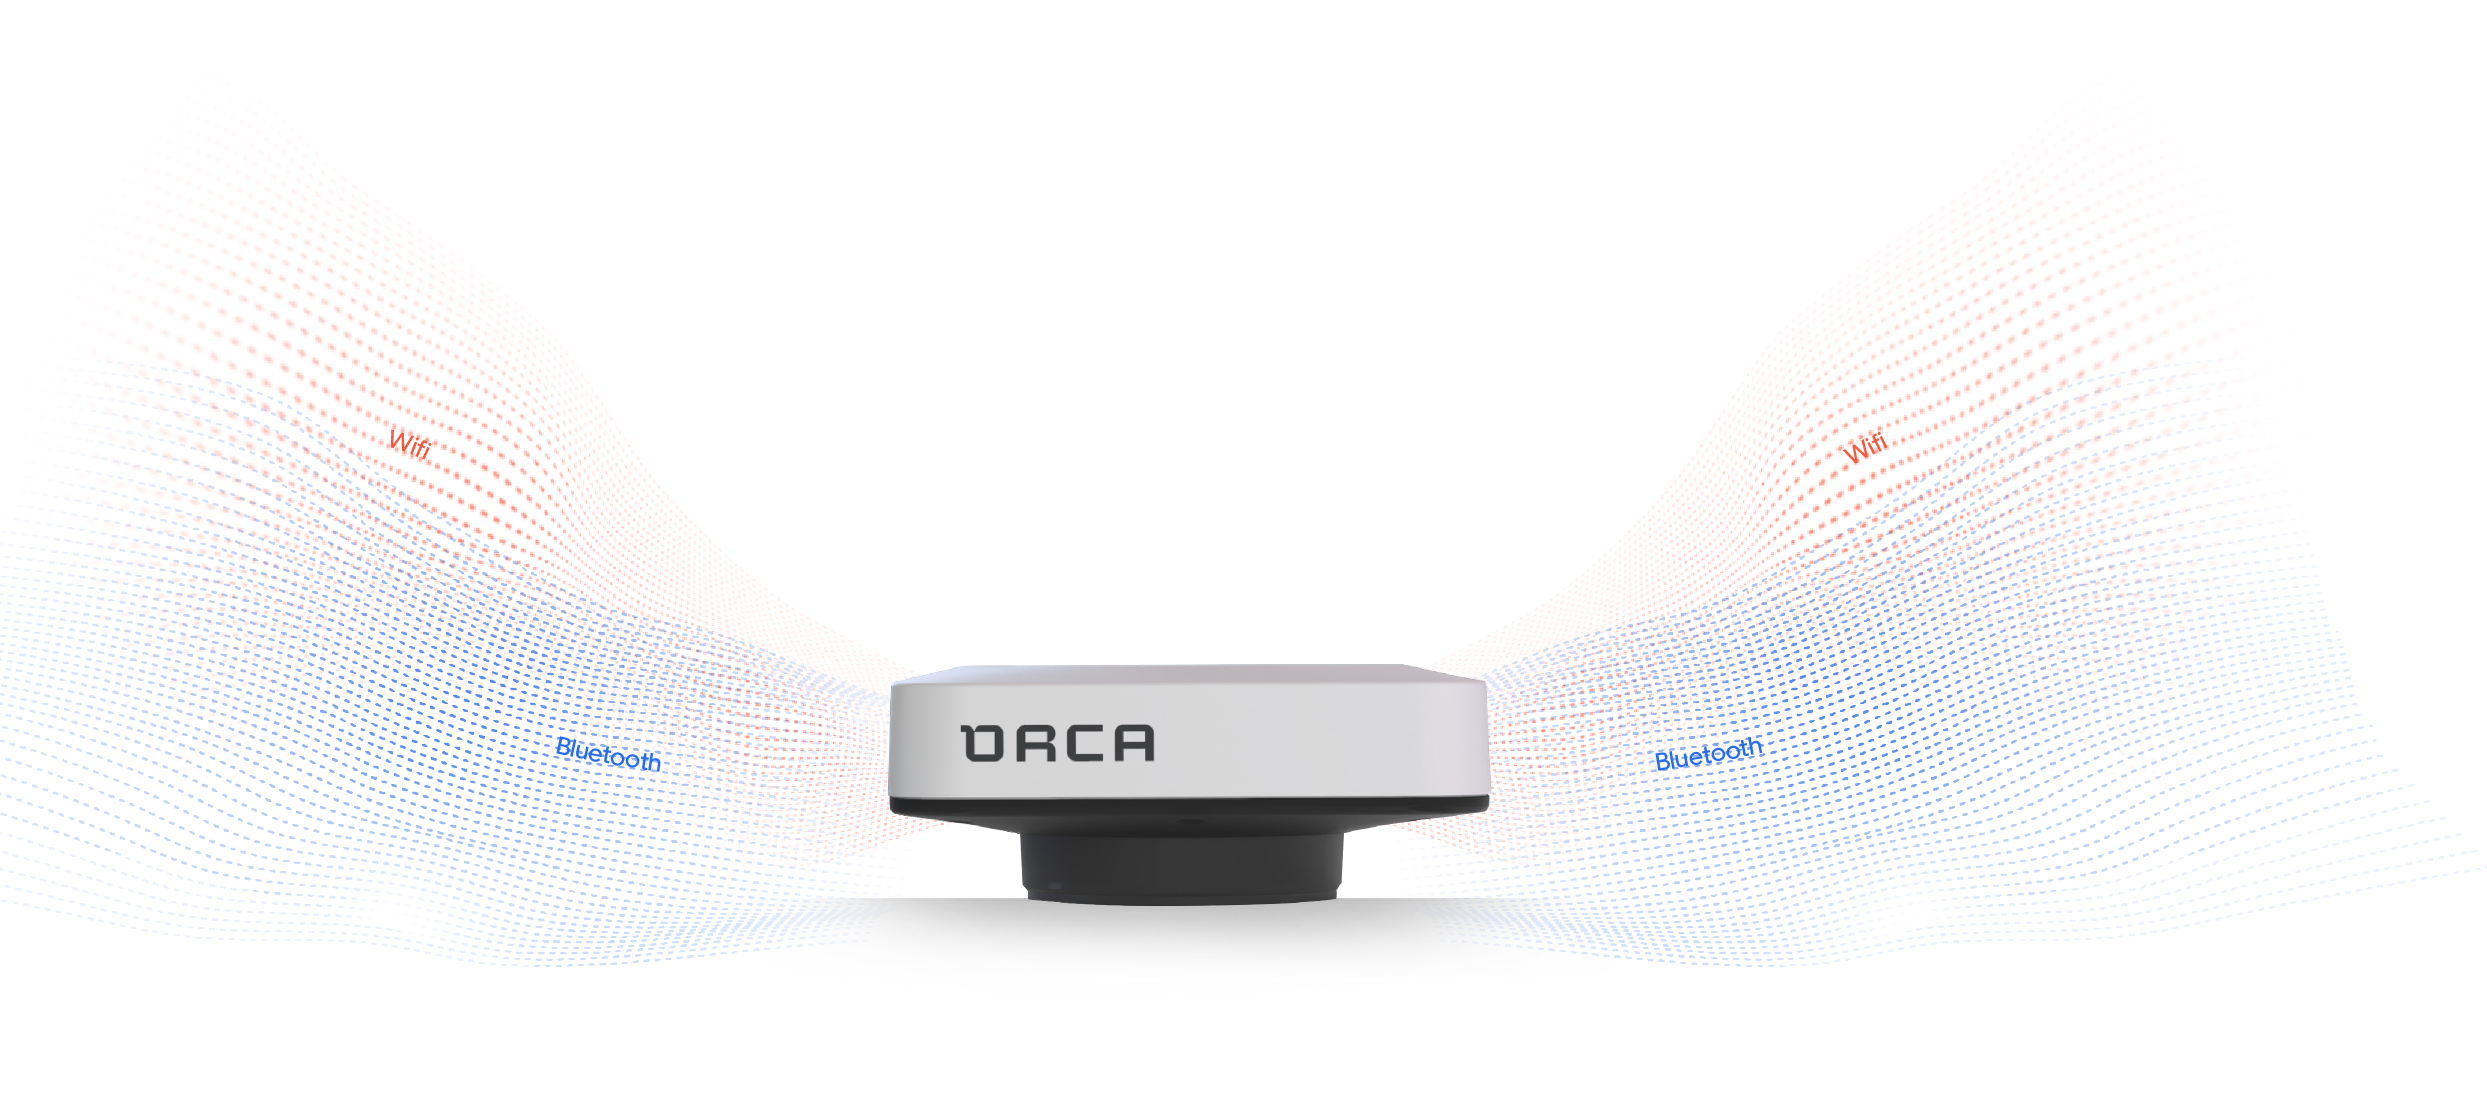 The Orca Core features Bluetooth and Wi-Fi to share data wirelessly with the Orca App